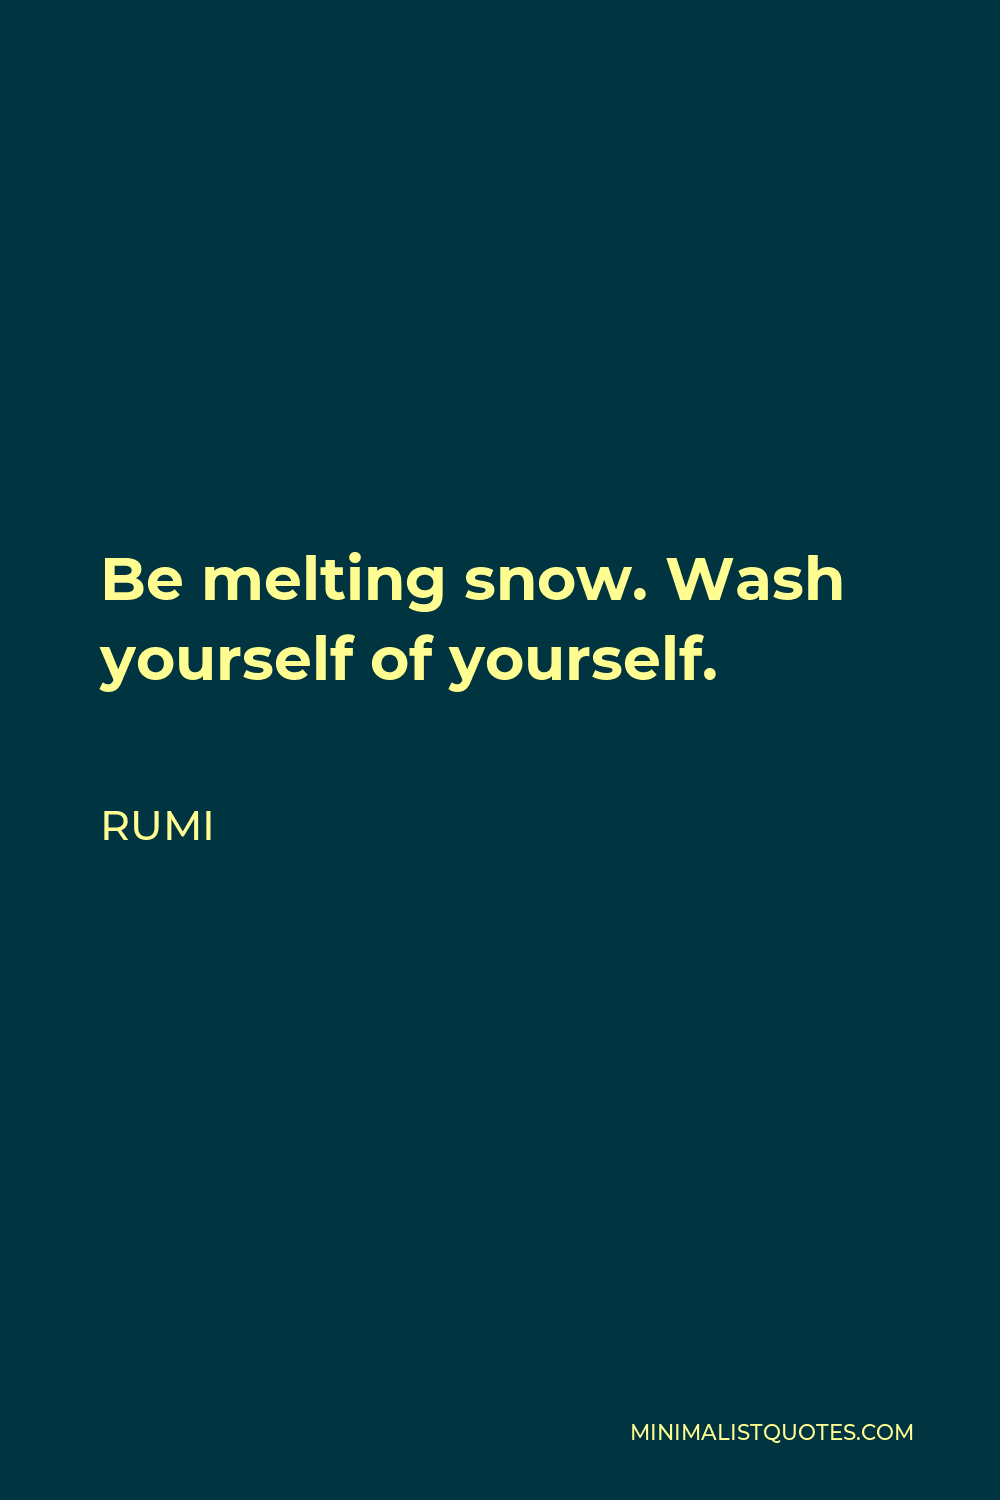 Rumi Quote - Be melting snow. Wash yourself of yourself.